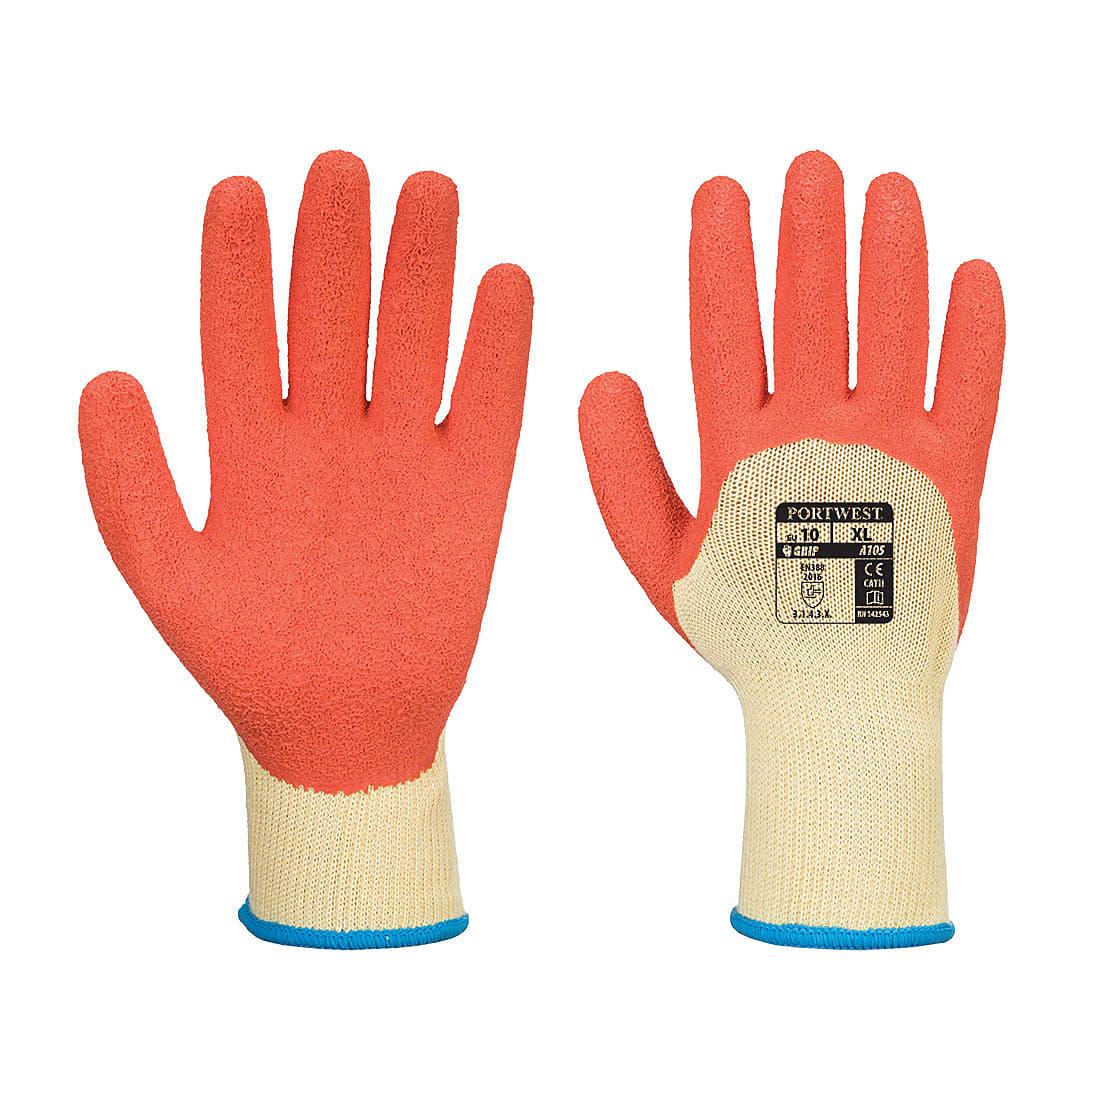 Portwest Grip Xtra Gloves in Yellow / Orange (Product Code: A105)